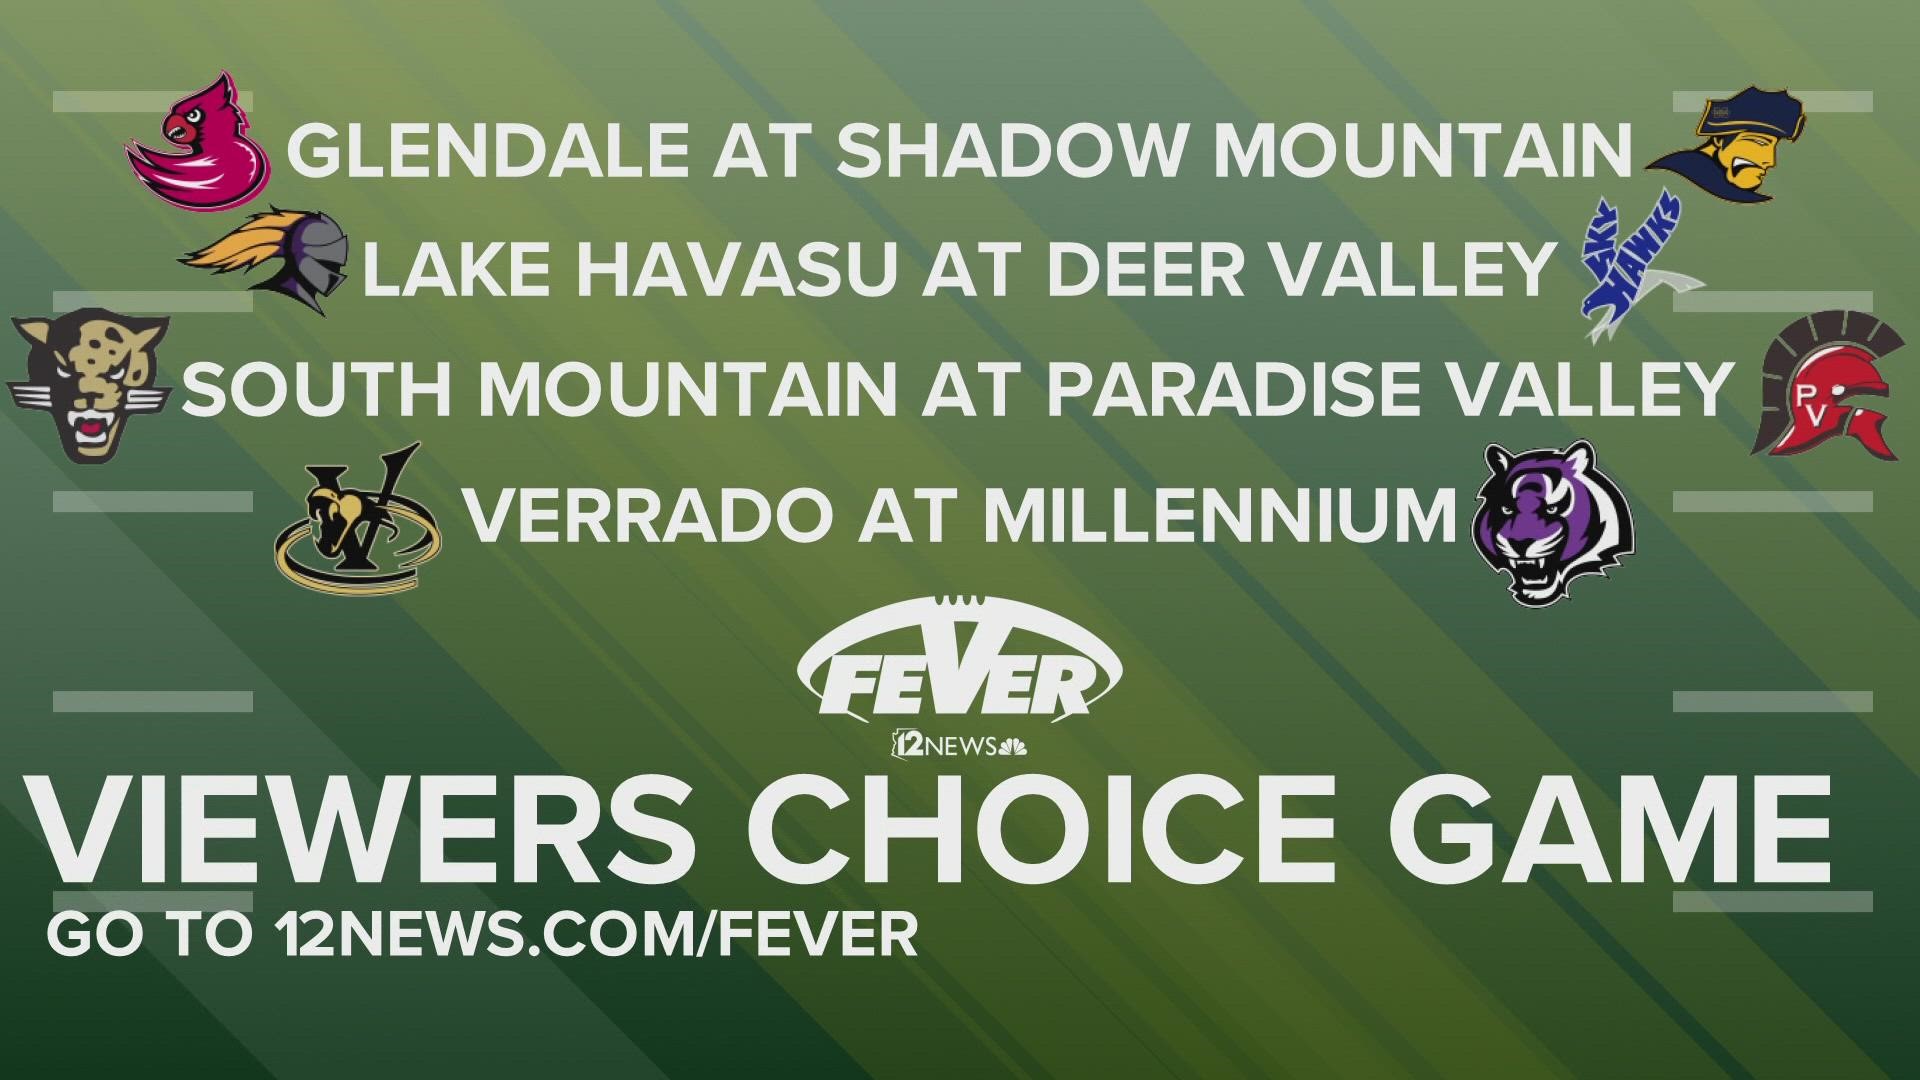 Go to 12news.com/Fever to vote for one of the games in this video to be the week 8 Viewers Choice Game!